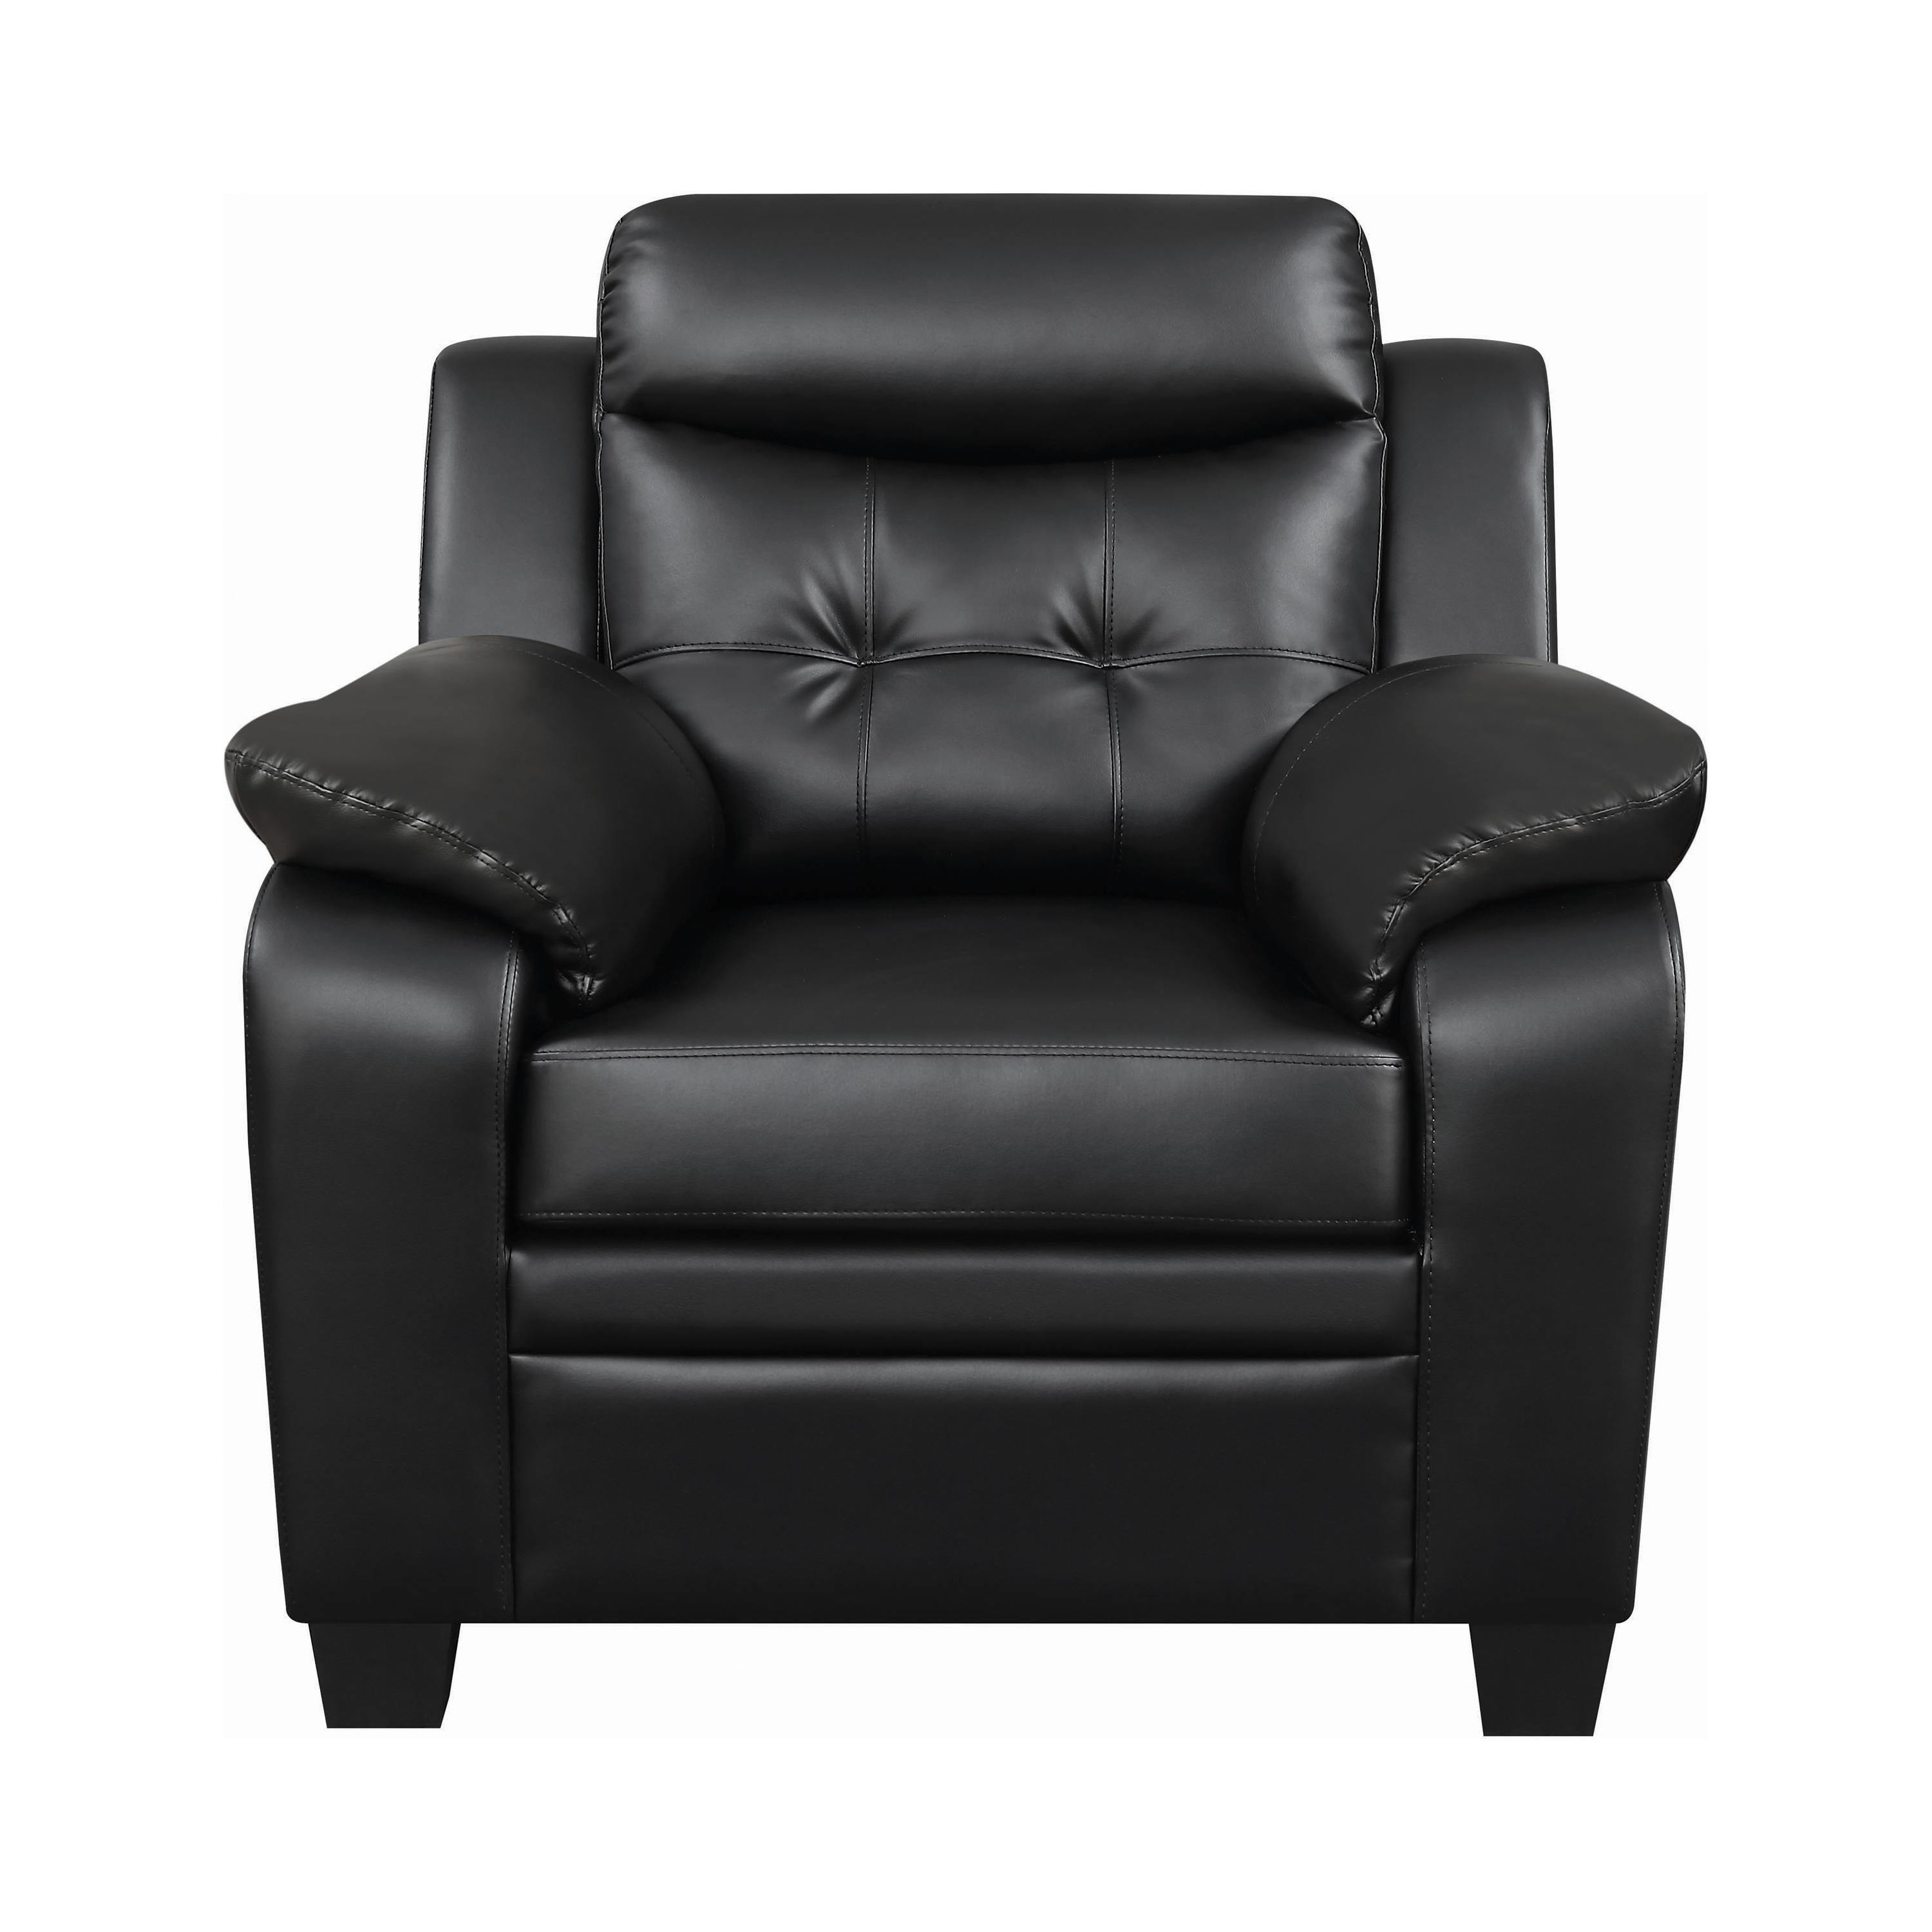 Transitional Arm Chair 506553 Finley 506553 in Black Leatherette